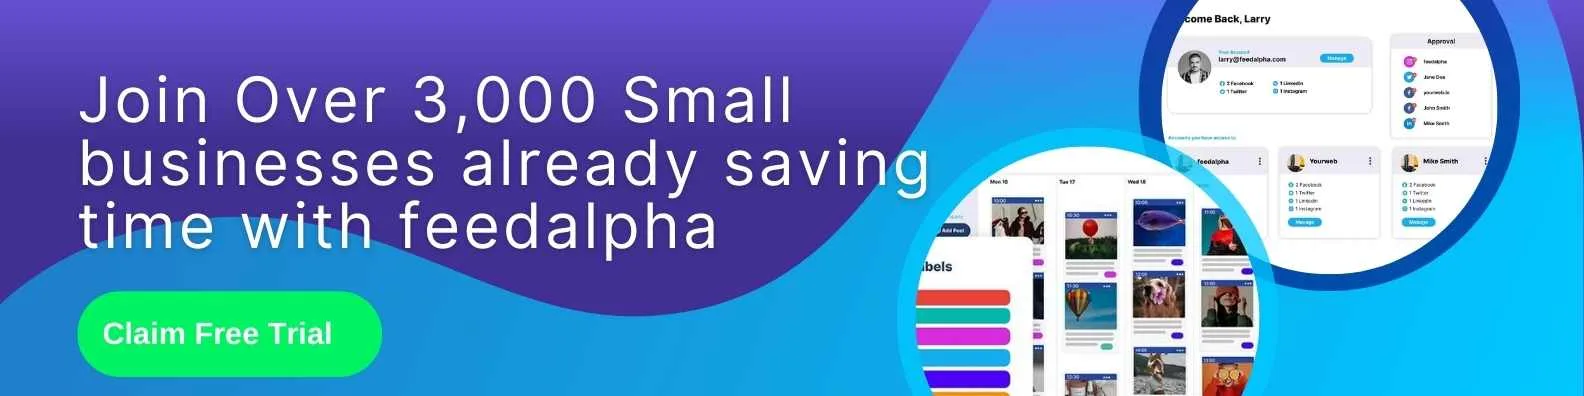 Schedule posts on feedalpha for small businesses 